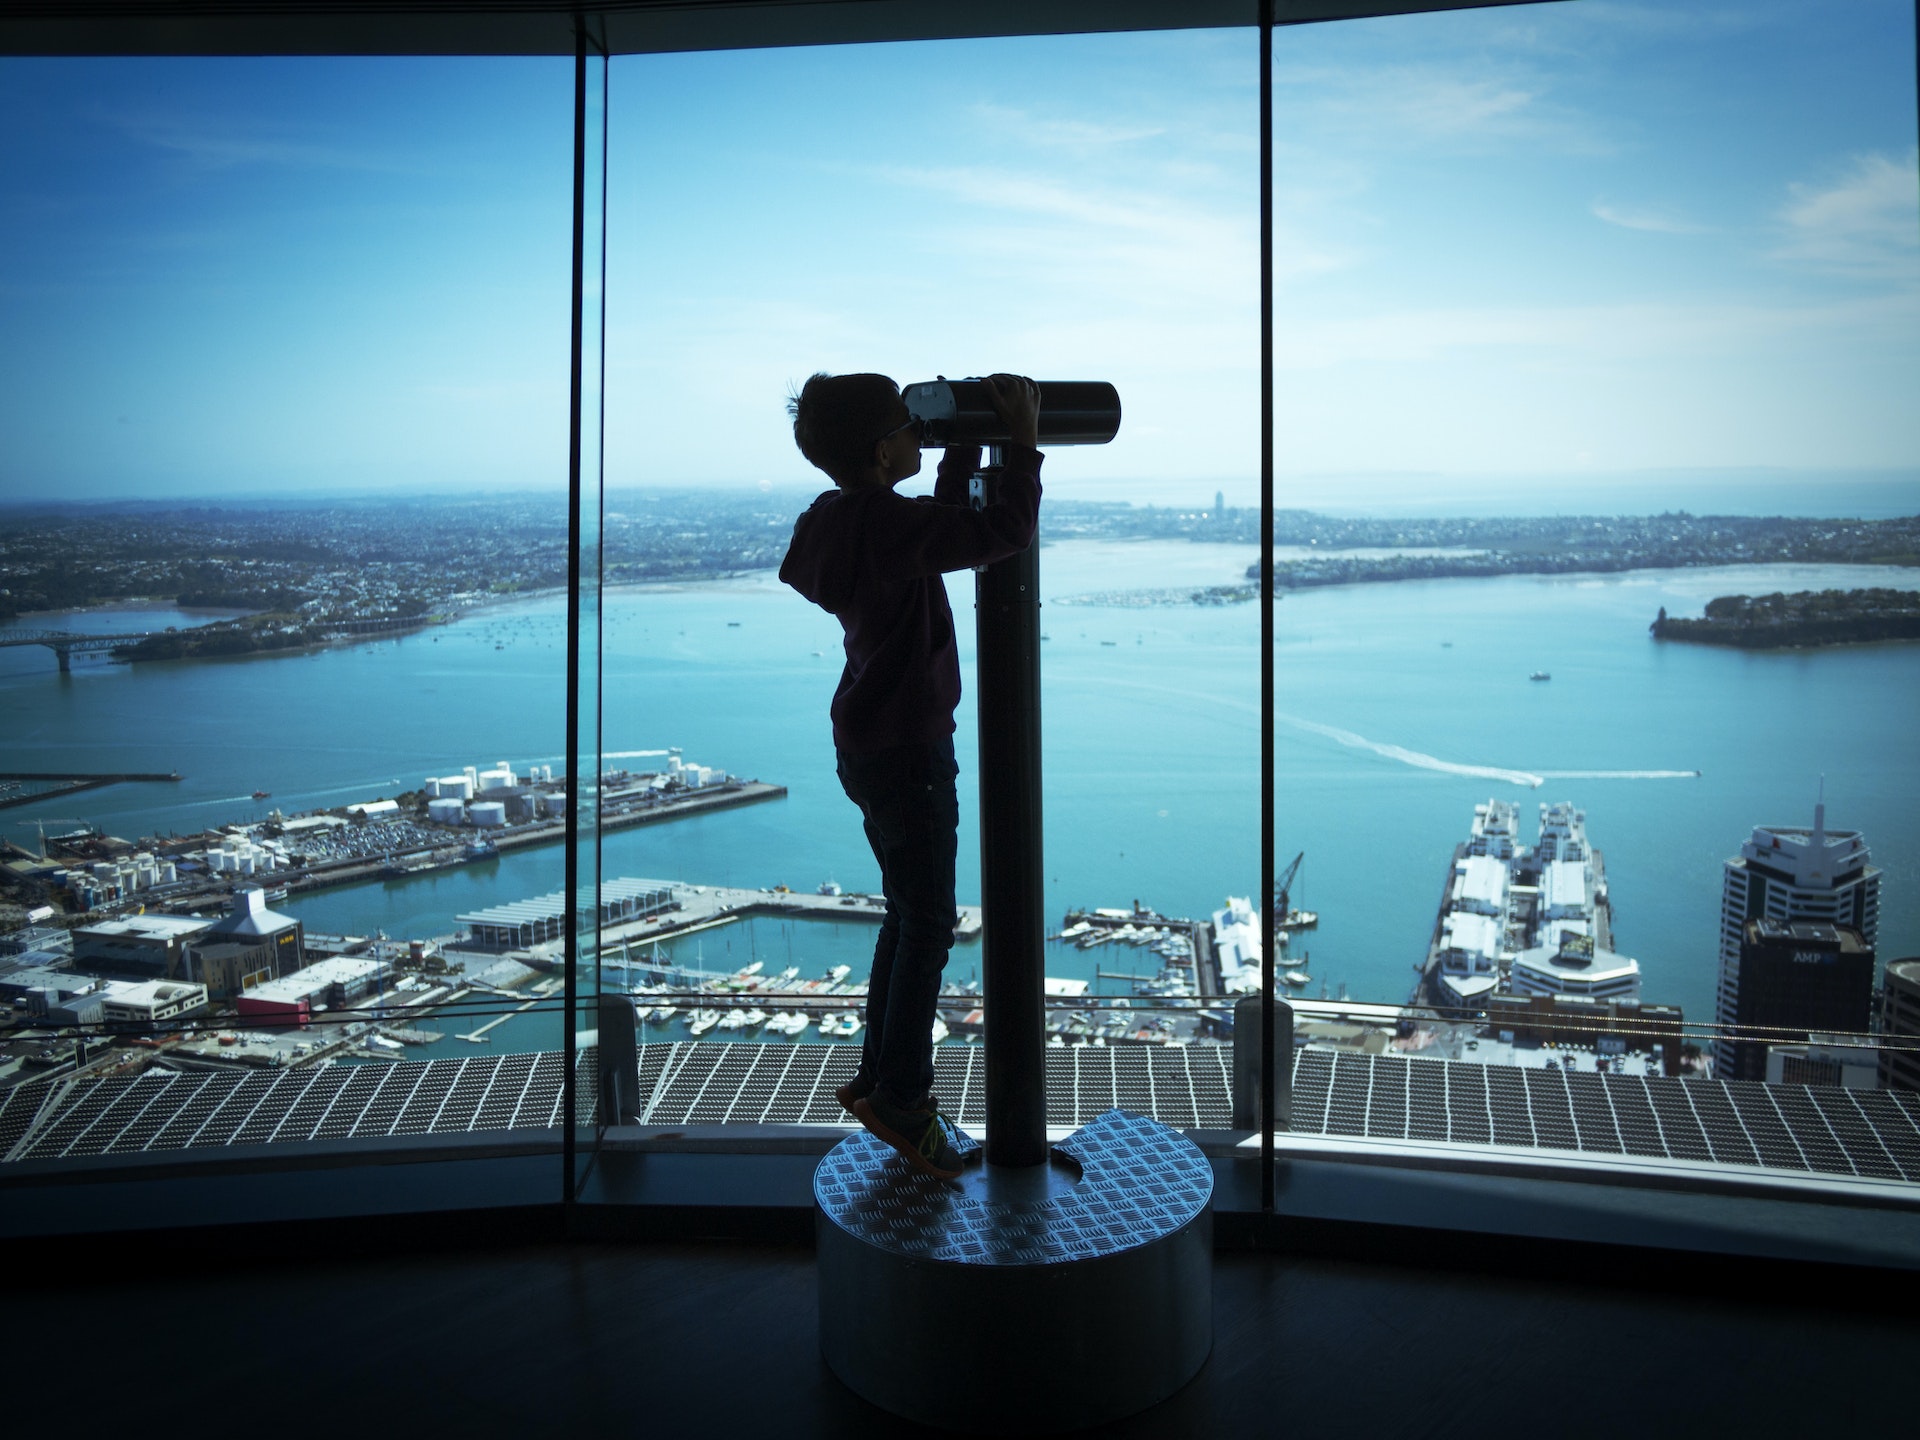 A teen boy steps on tiptoes to see through a telescope inside of the Sky Tower, Auckland, he's almost a siloutte with large ships docked in the waters below